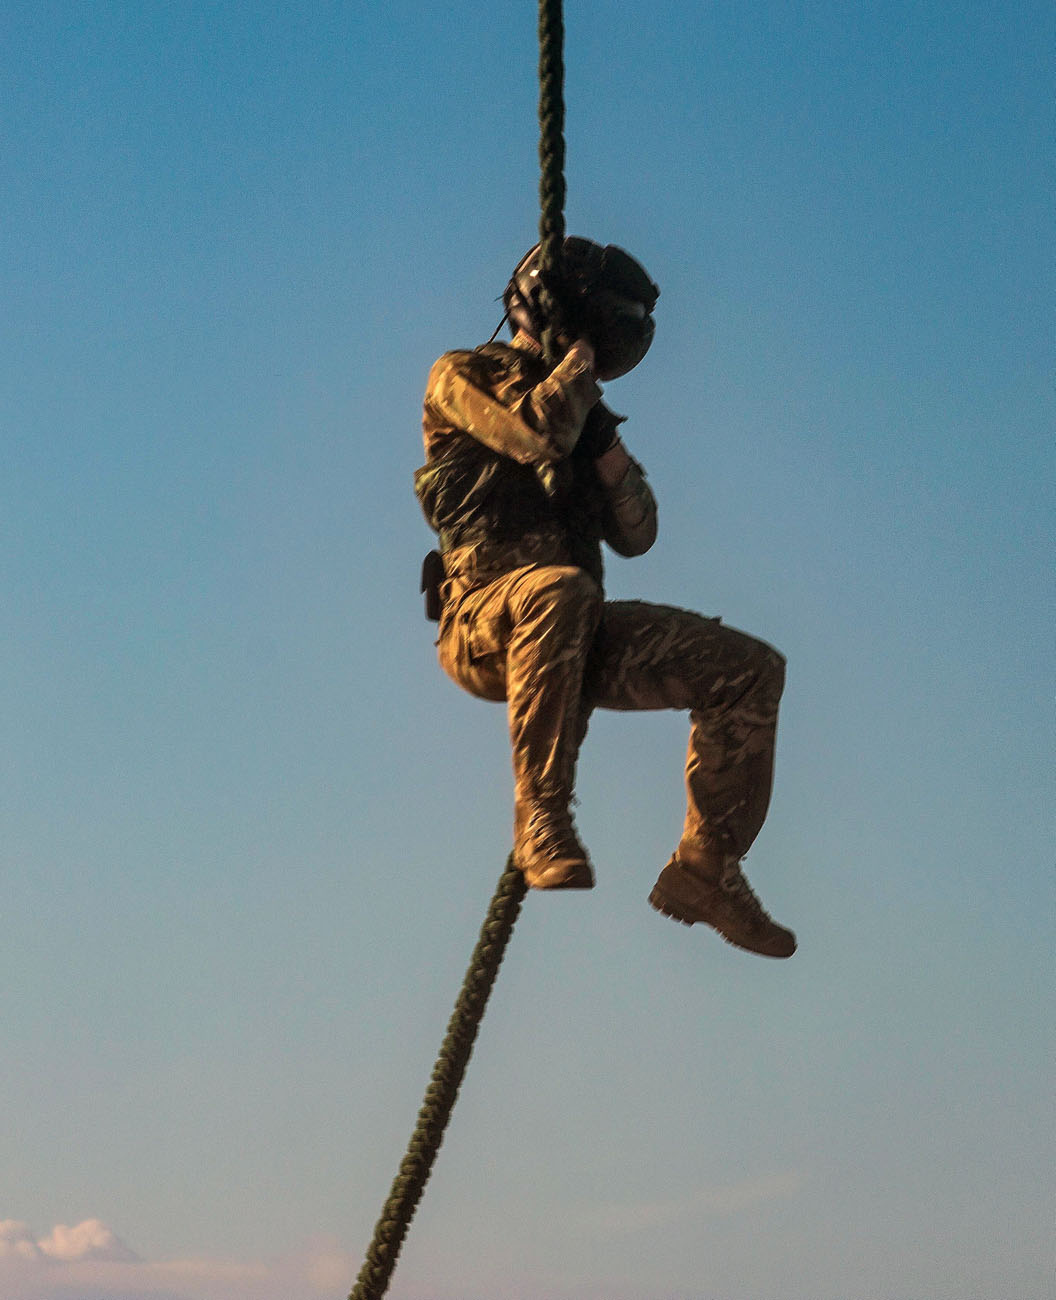 Fast rope training on HMS St Albans